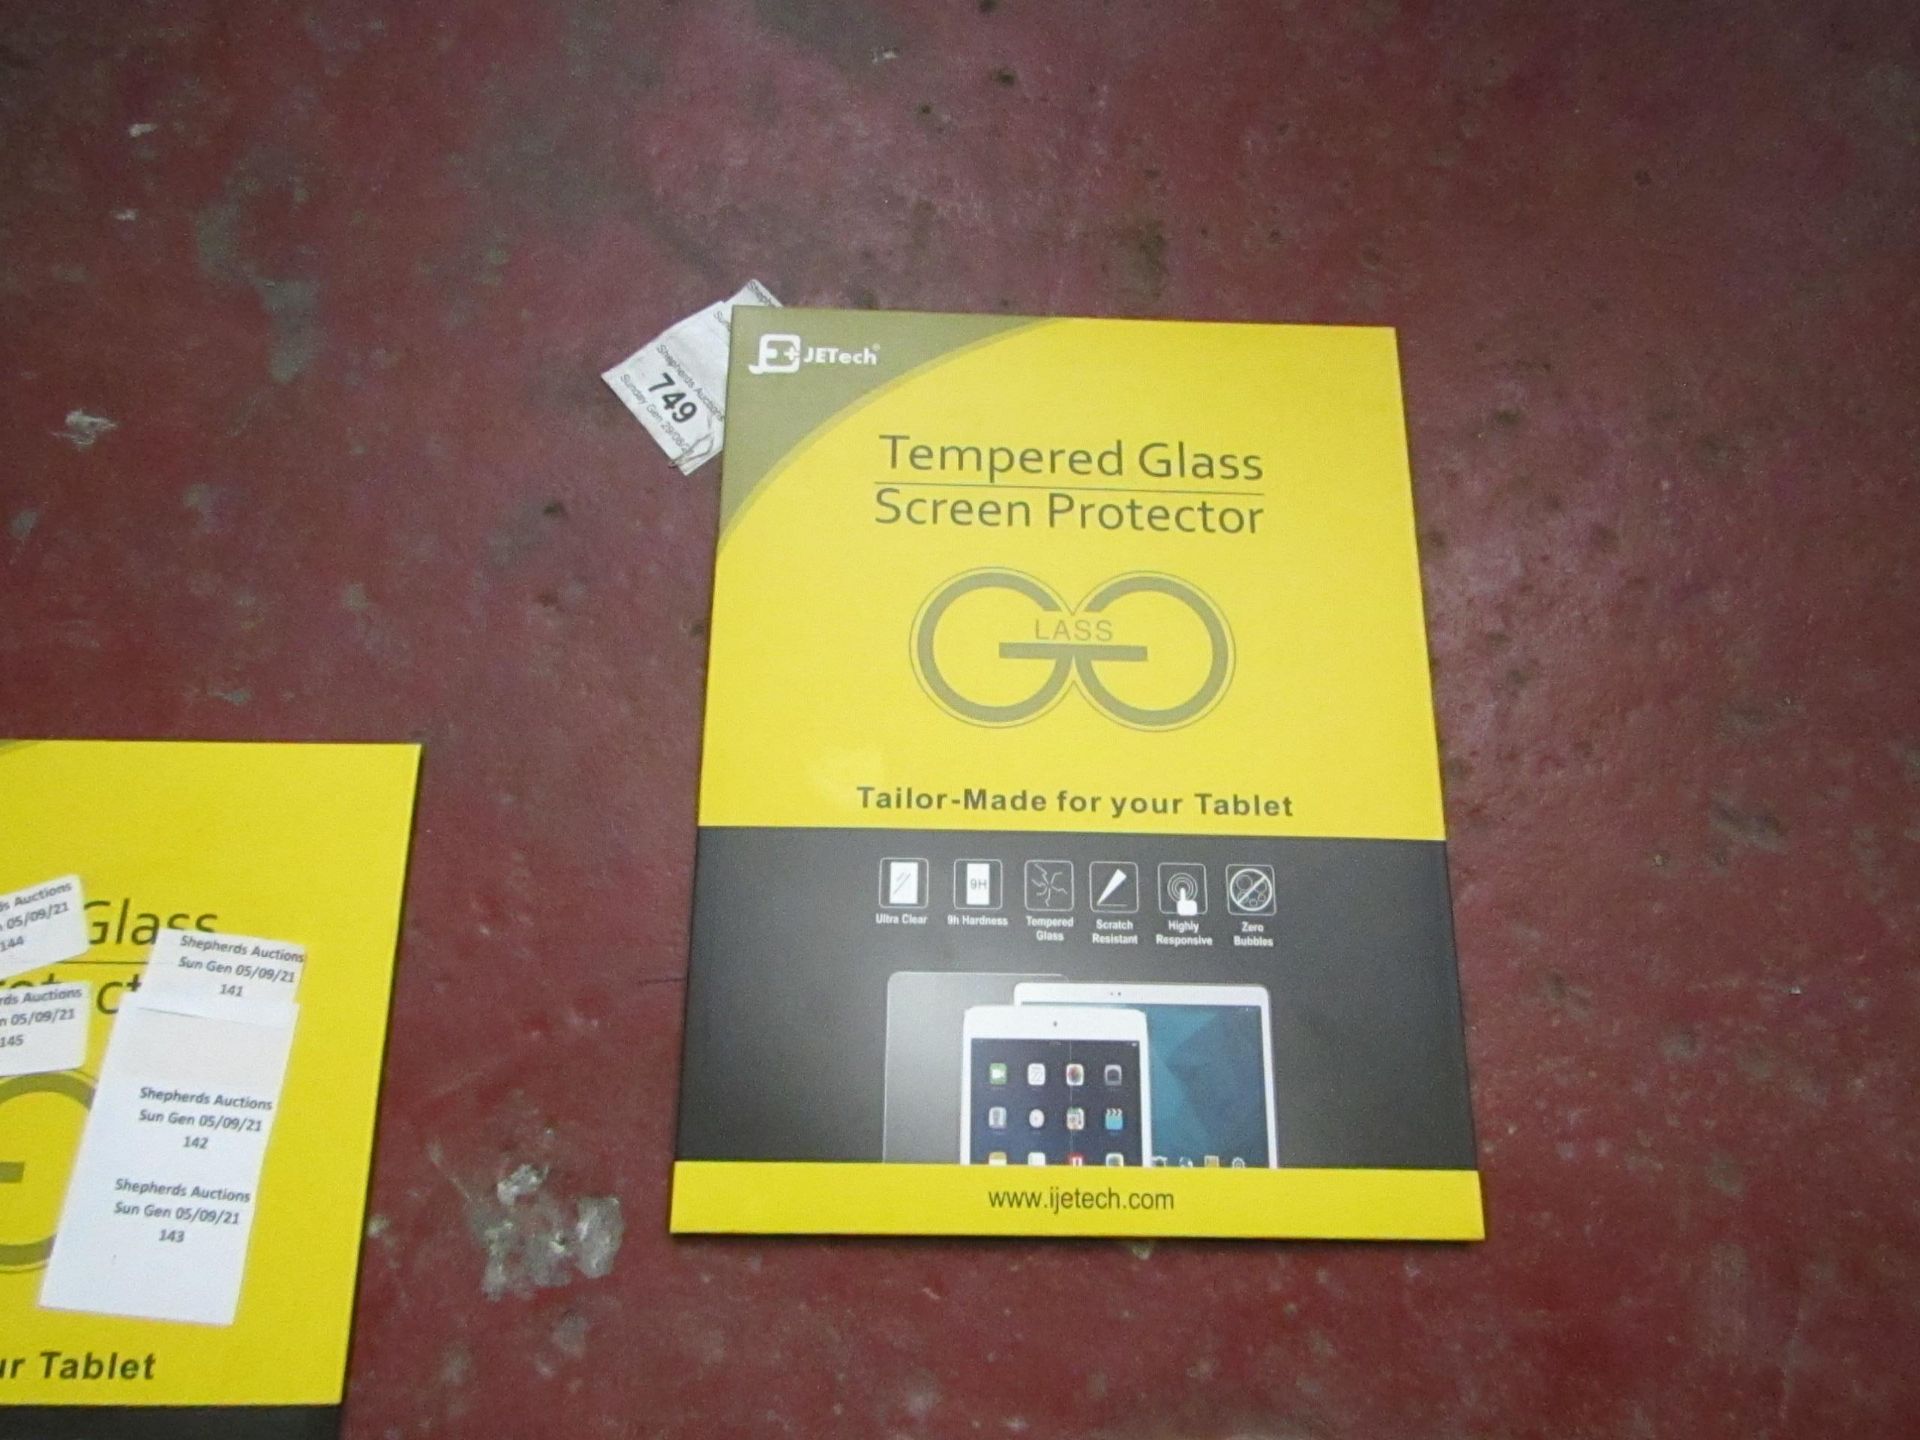 Jetech - Tempered Screen Protector - Tailor Made for Your Tablet - New & Packaged.